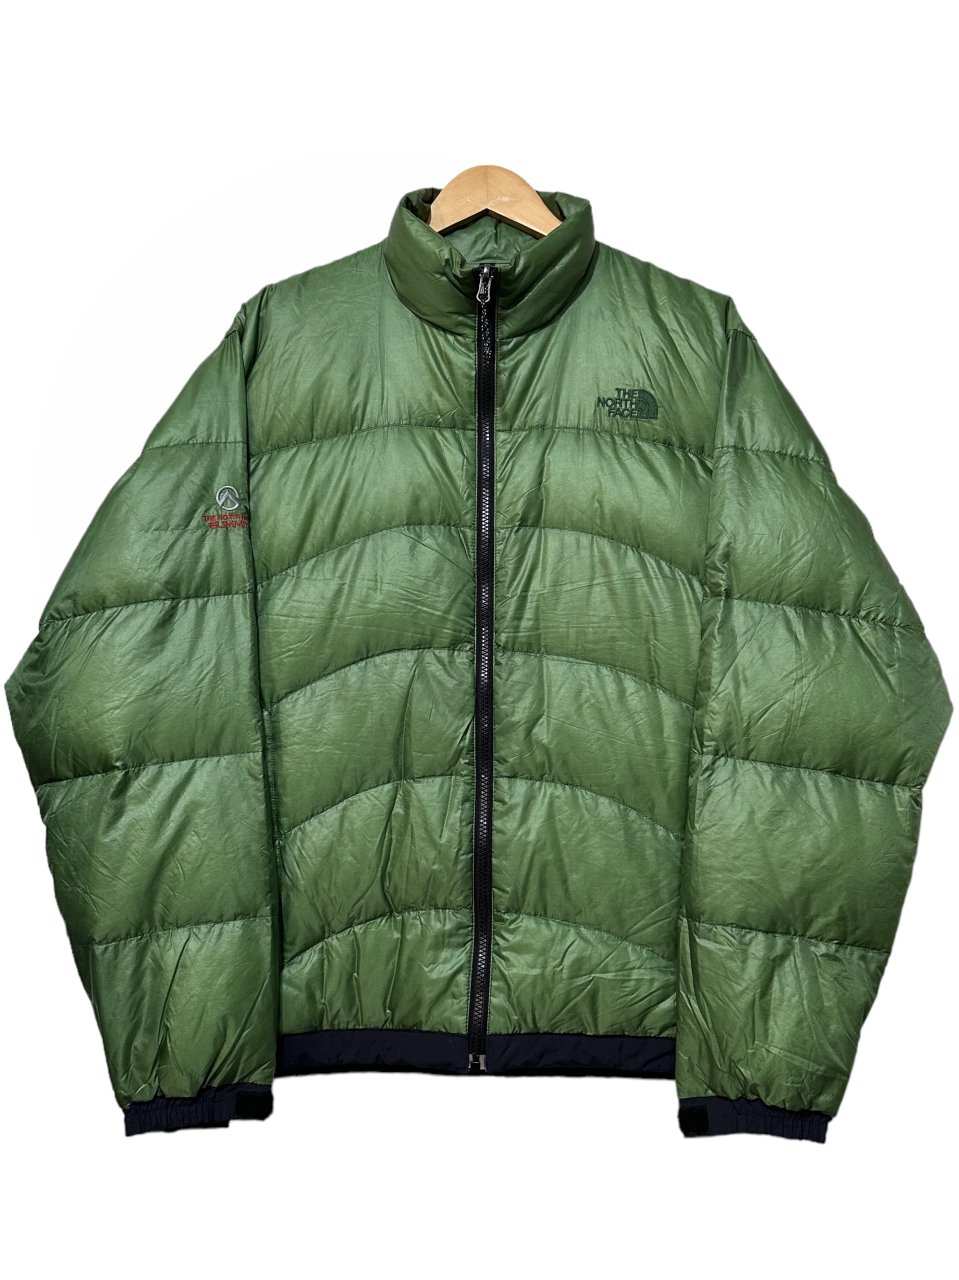 00s THE NORTH FACE Aconcagua Down Jacket 緑 L ノースフェイス 